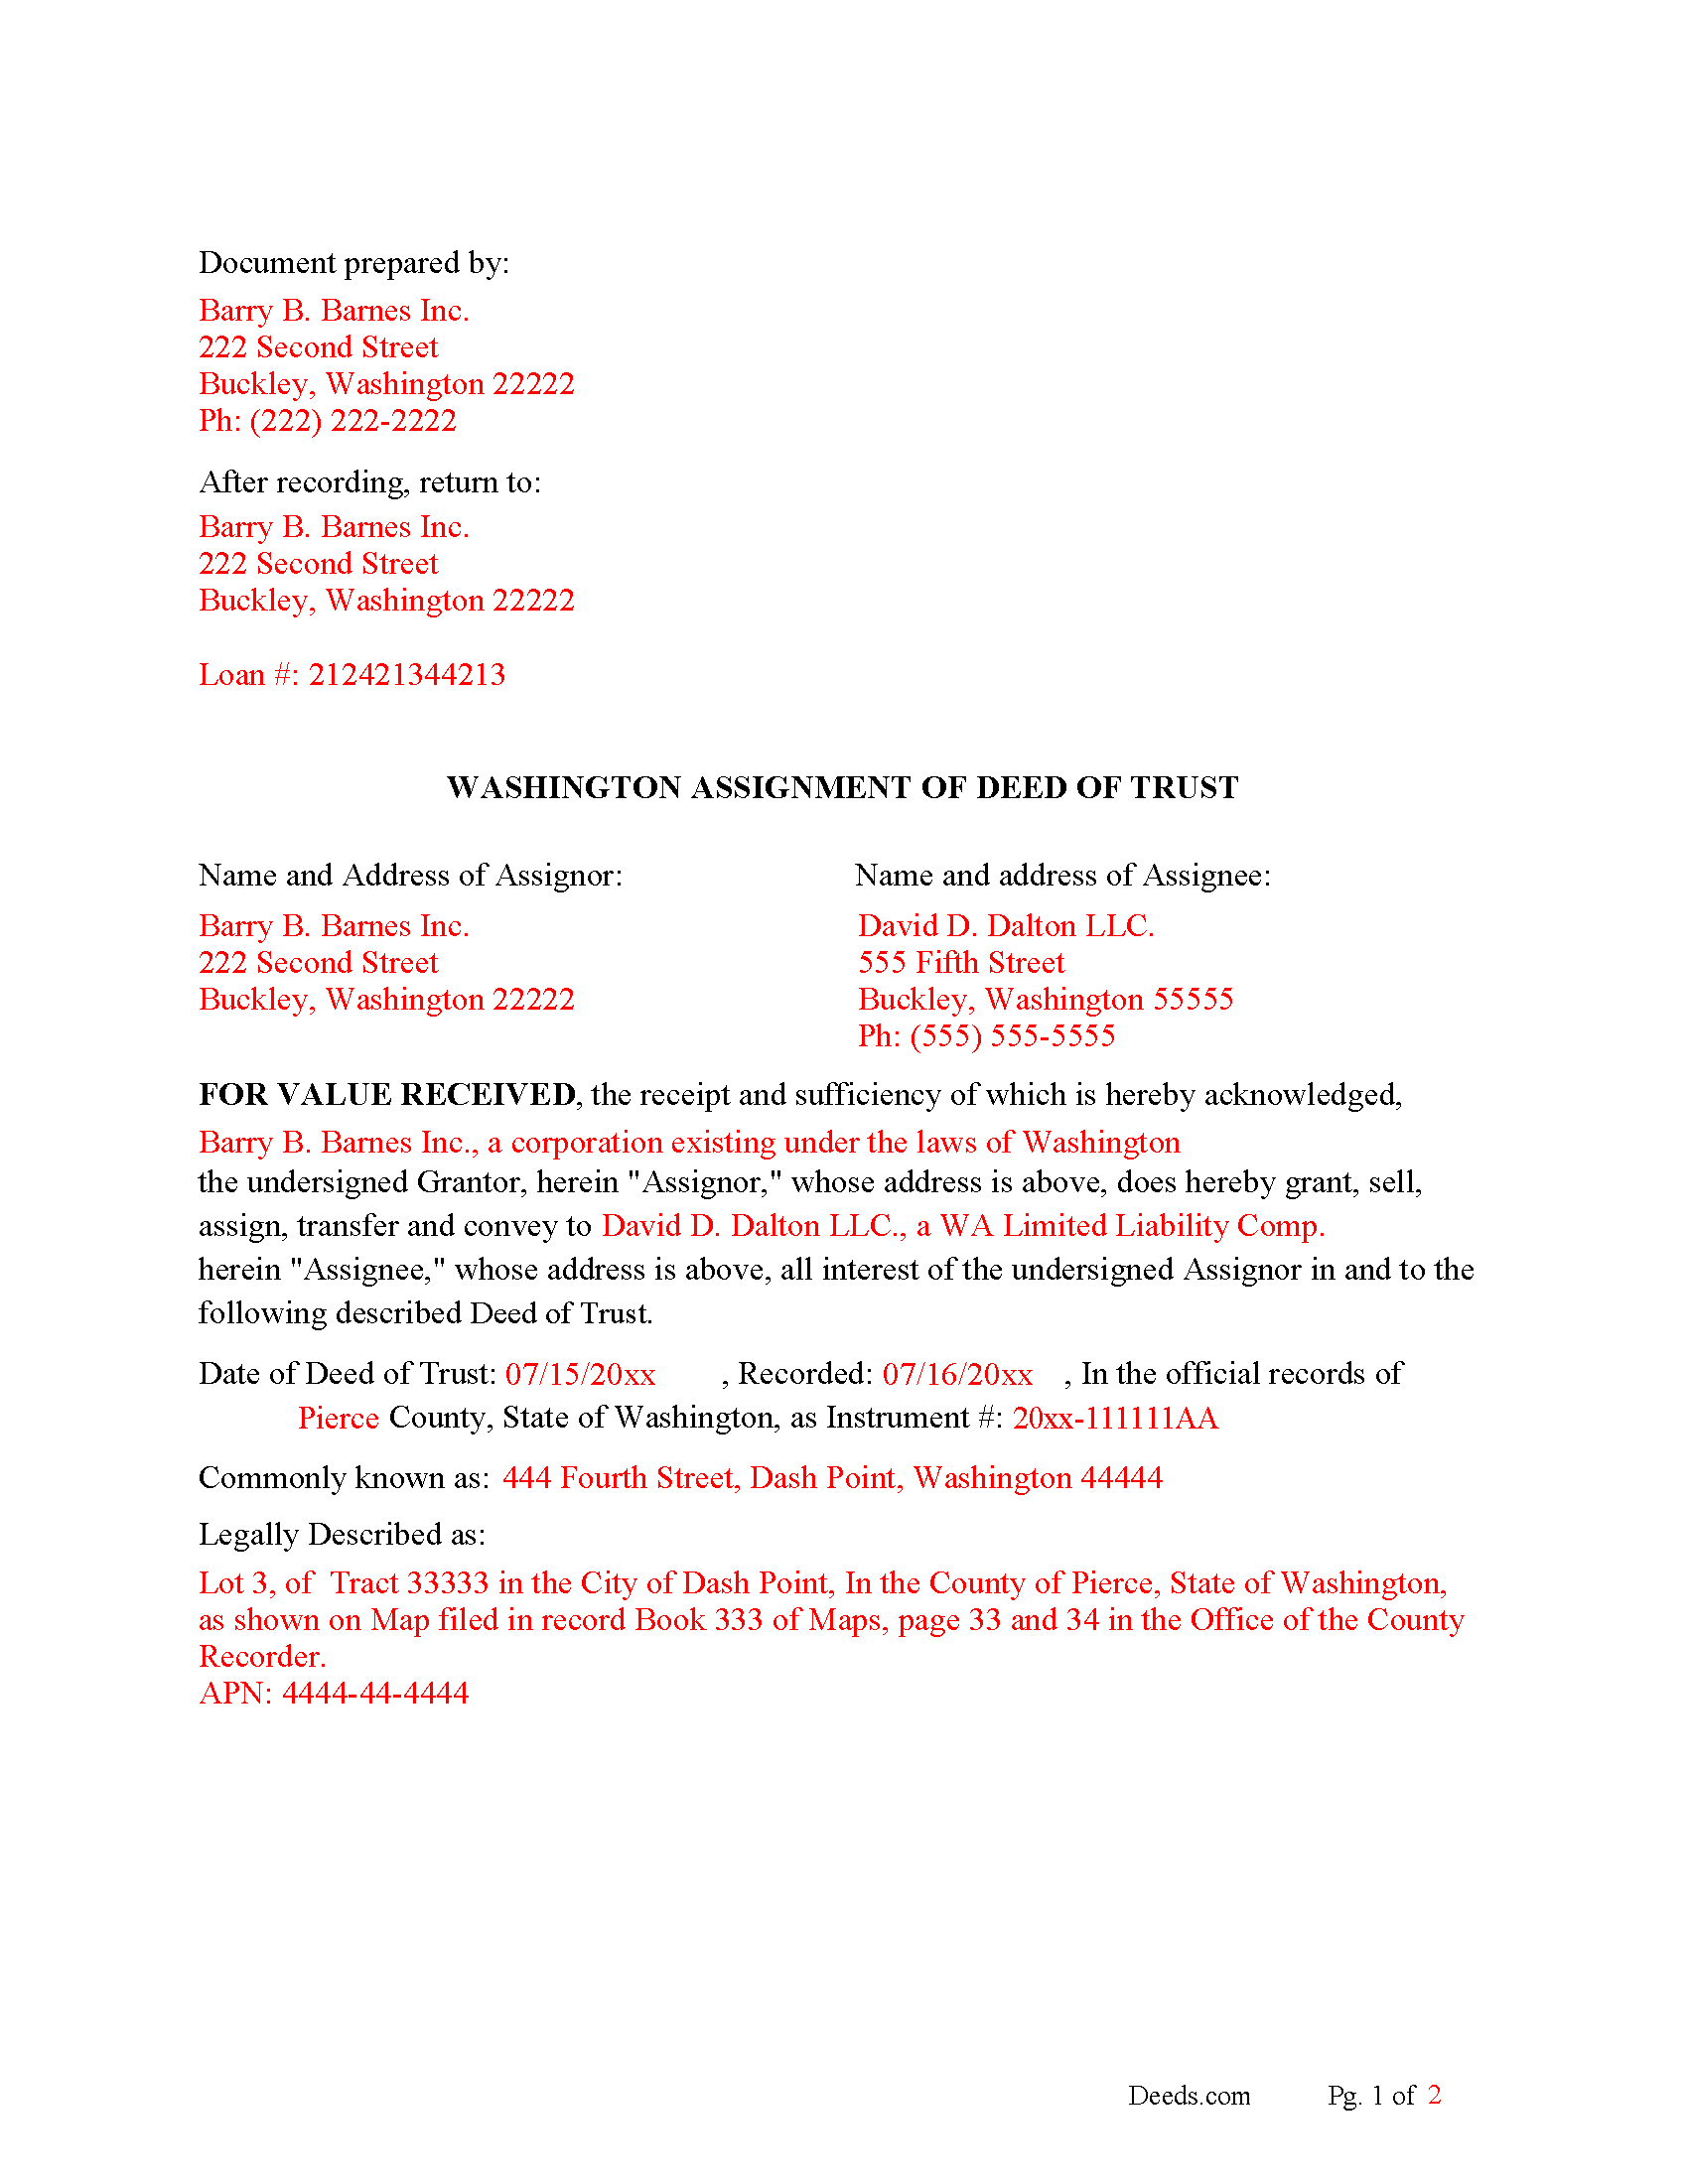 Completed Example of the Assigment of Deed of Trust Document